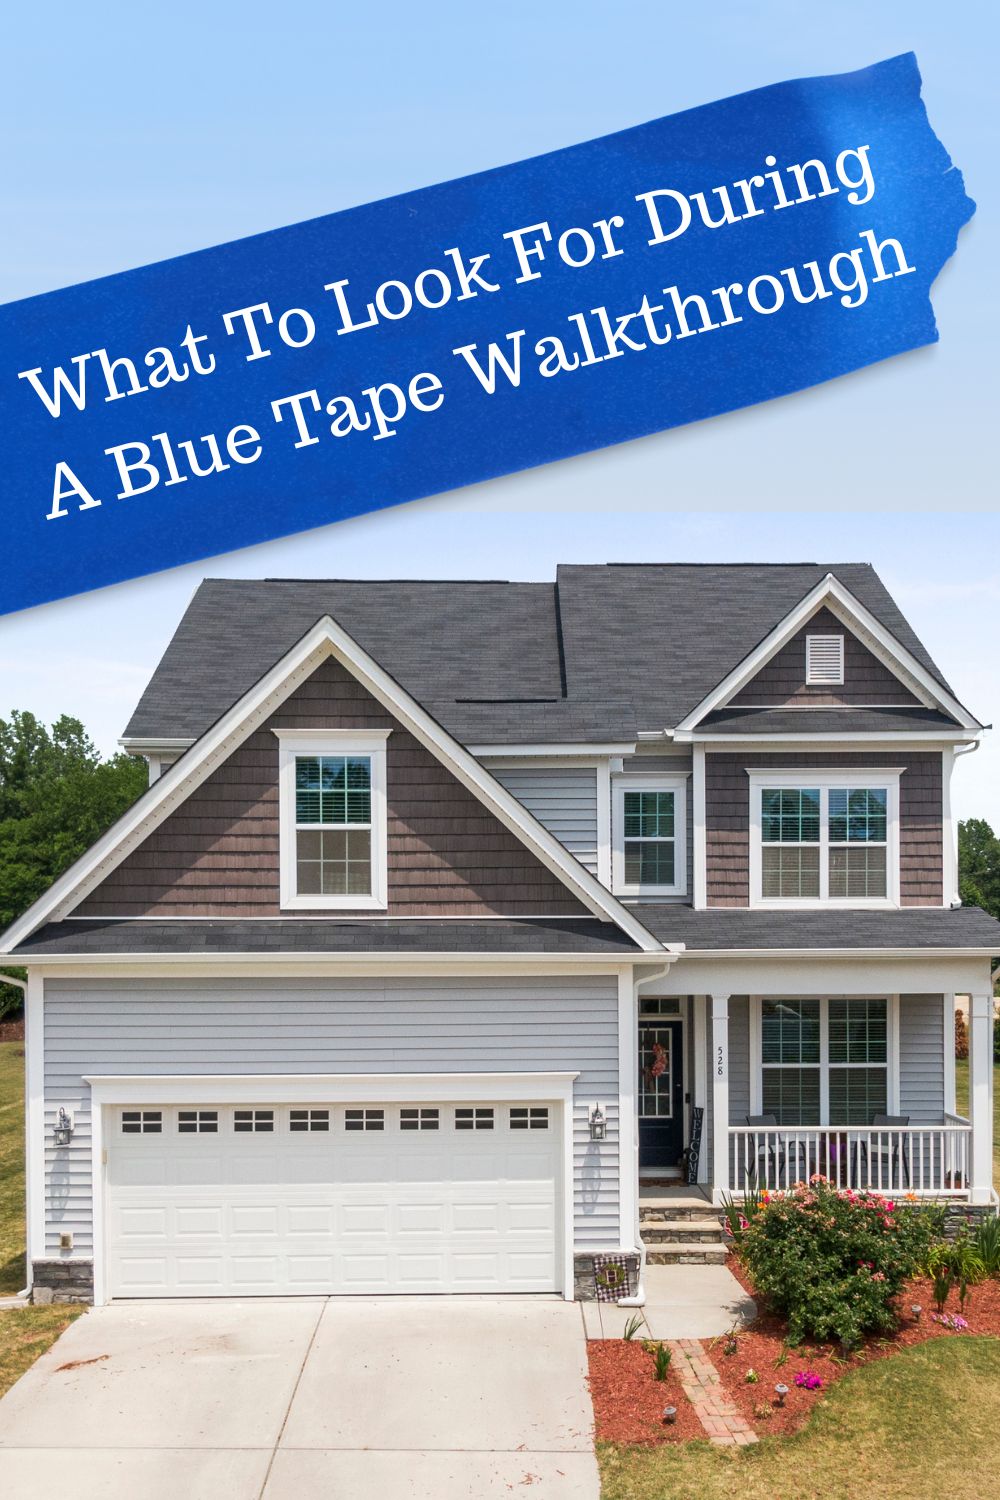 Here is a list of what to look for during a blue tape walkthrough. Moving into a new build is exciting, so be sure your home is just the way you want it!